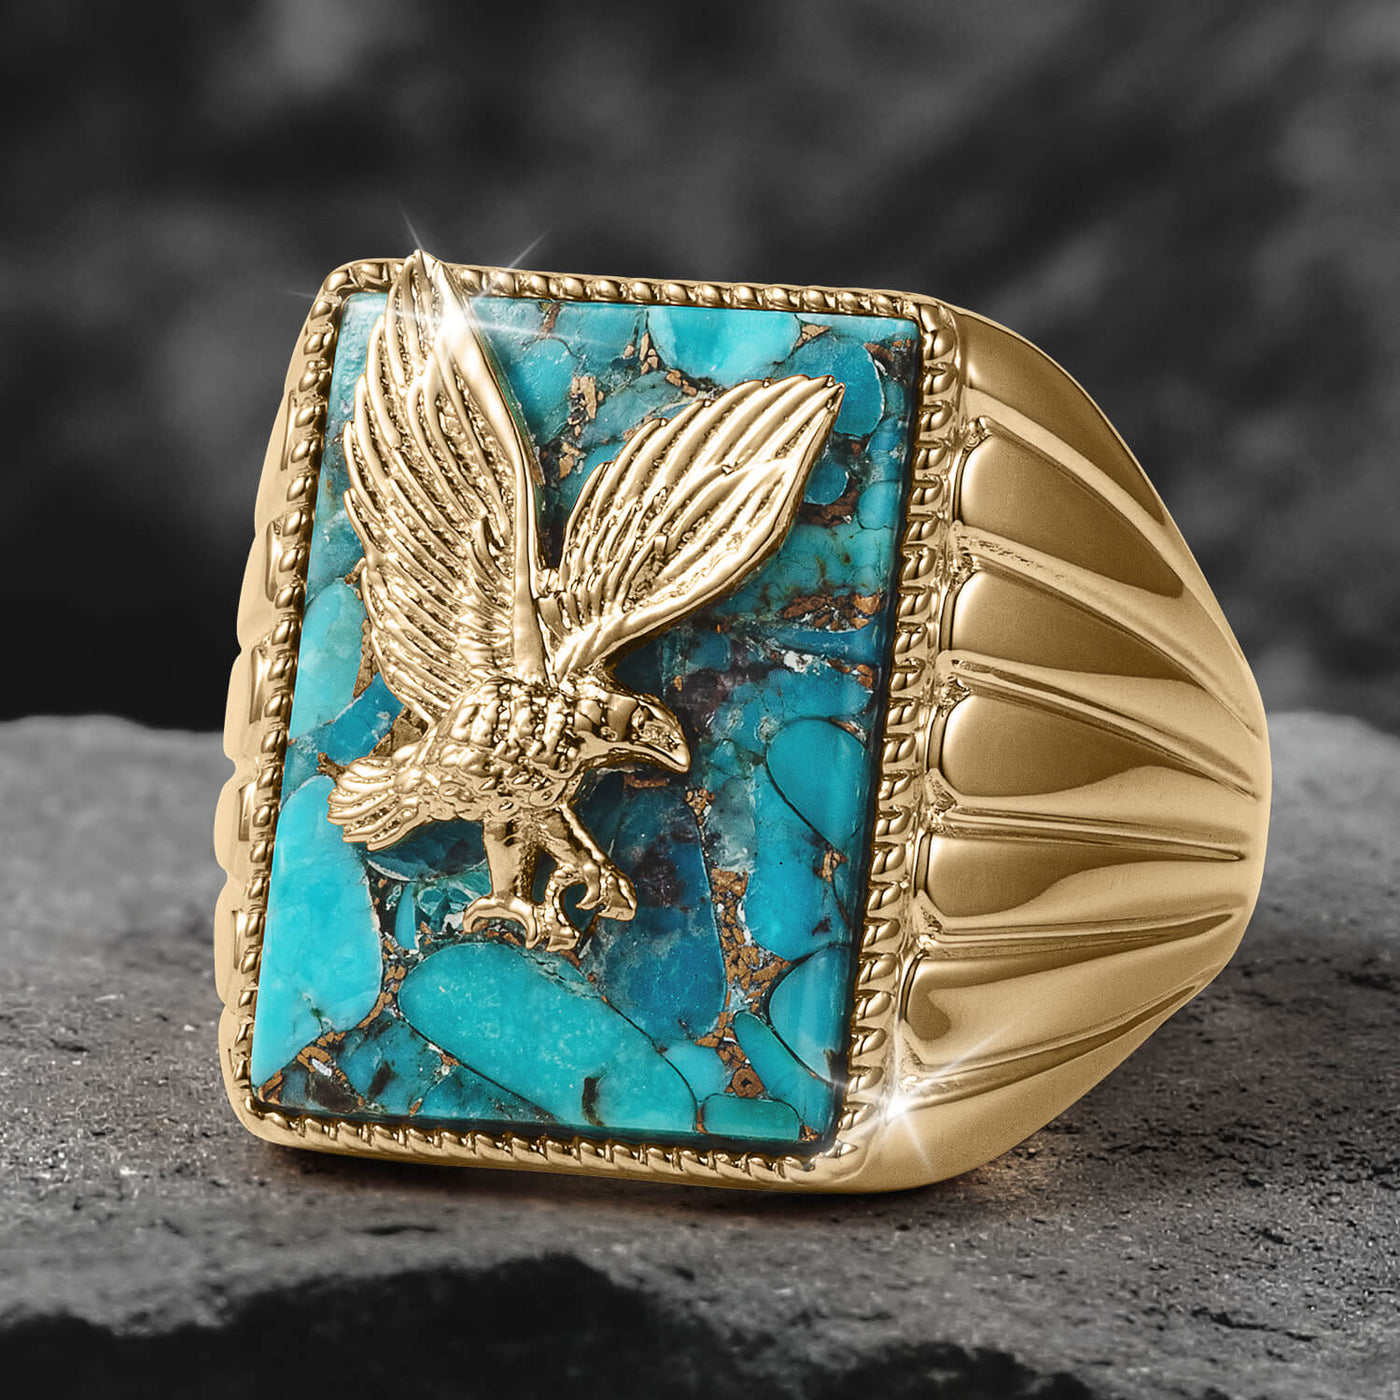 Gold Mexican Eagle Emblem Coat Of Arms Men's Signet Ring | Factory Direct  Jewelry